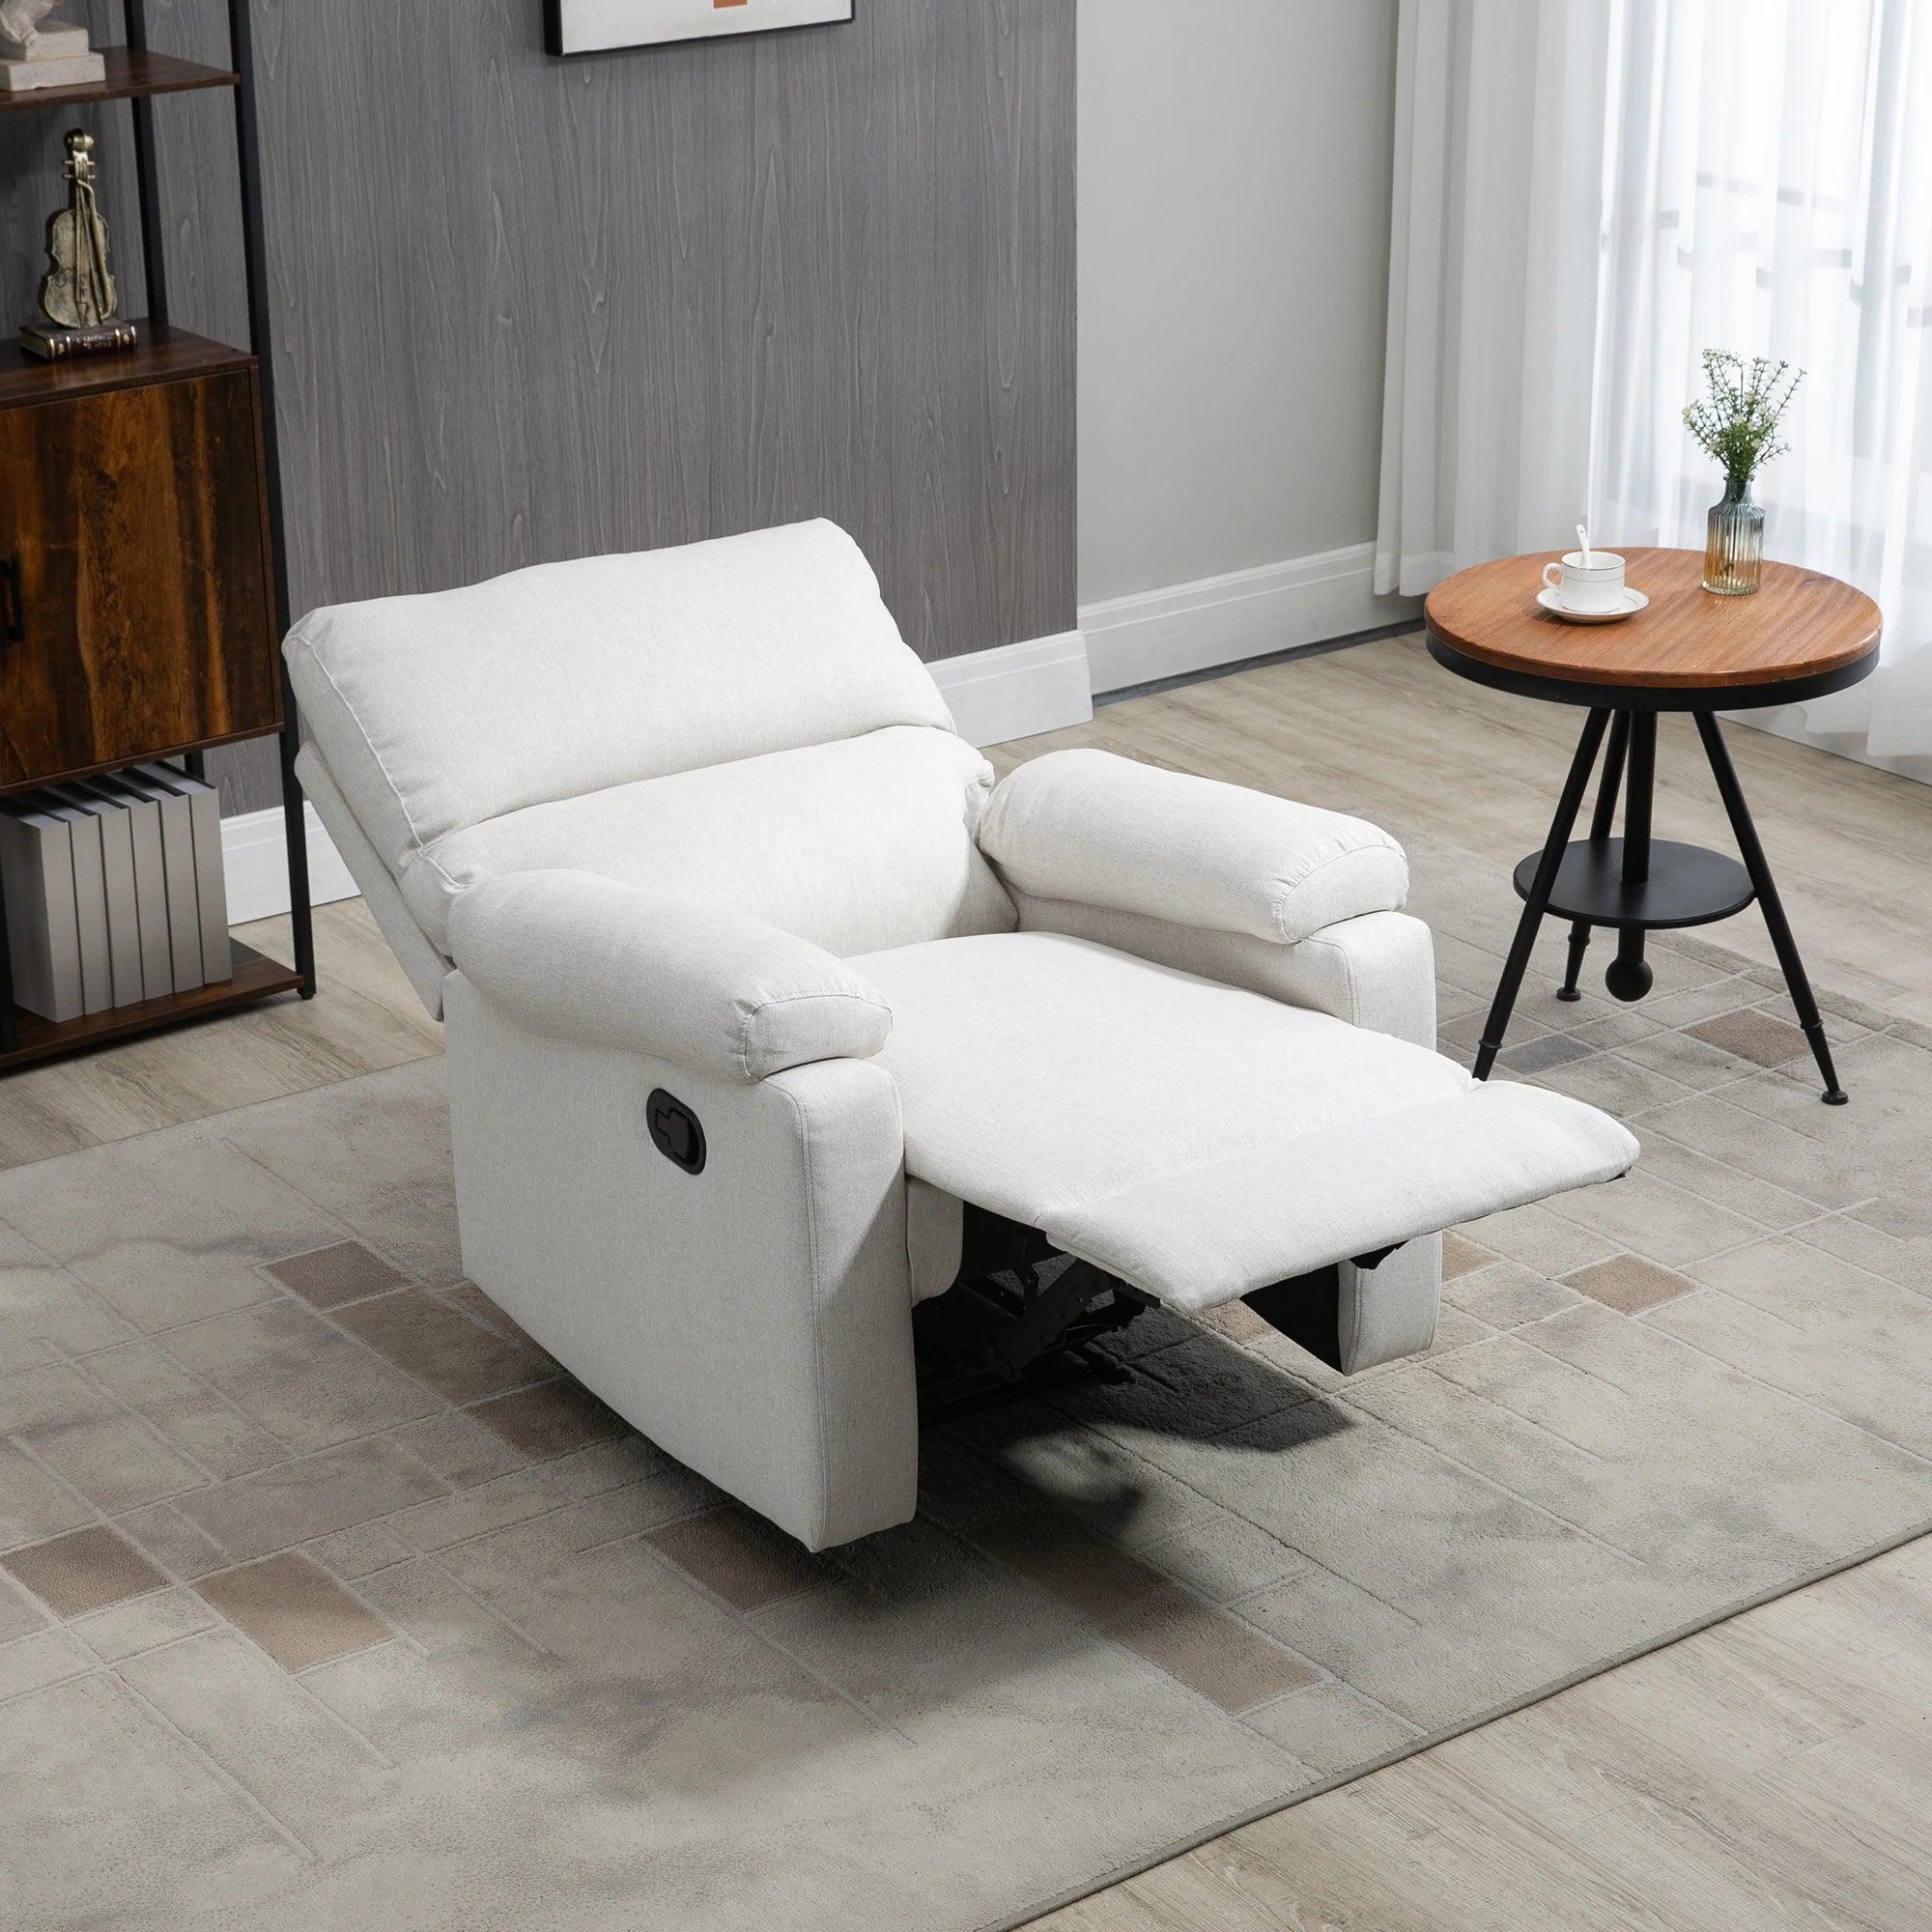 Recliner Chair, Manual Reclining Chair with Footrest, Padded Seat for Living Room, Bedroom, Study, Cream White